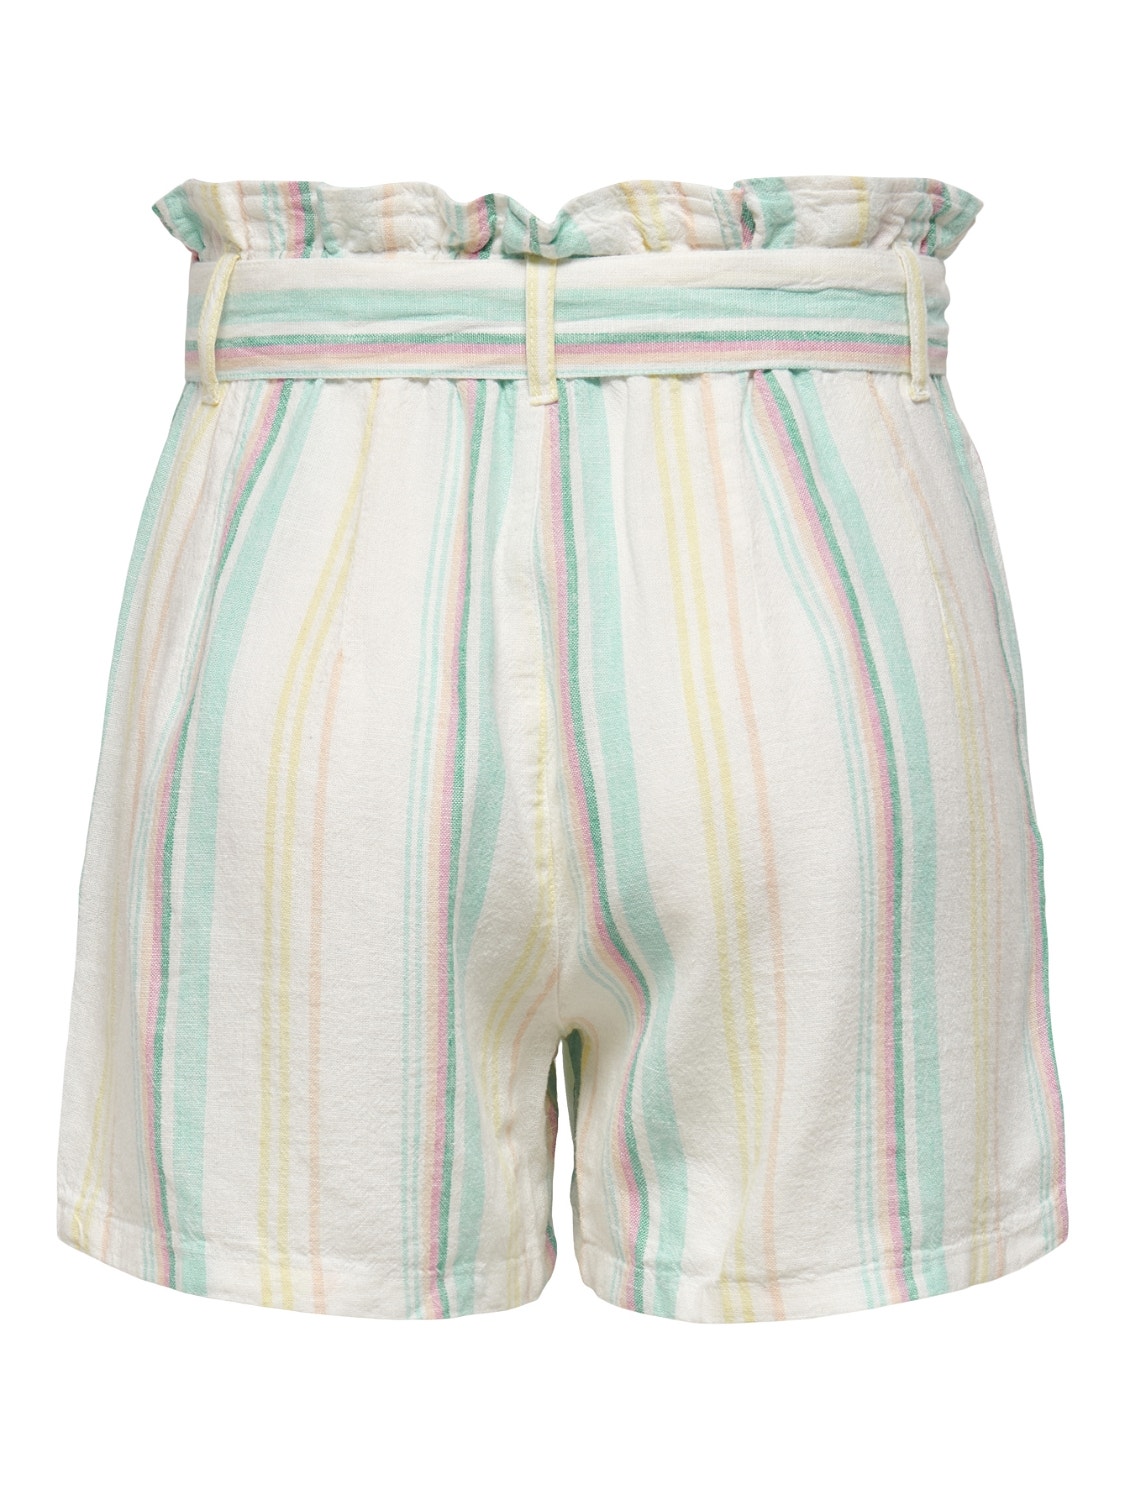 ONLY Hohe Taille Shorts -Cloud Dancer - 15256302